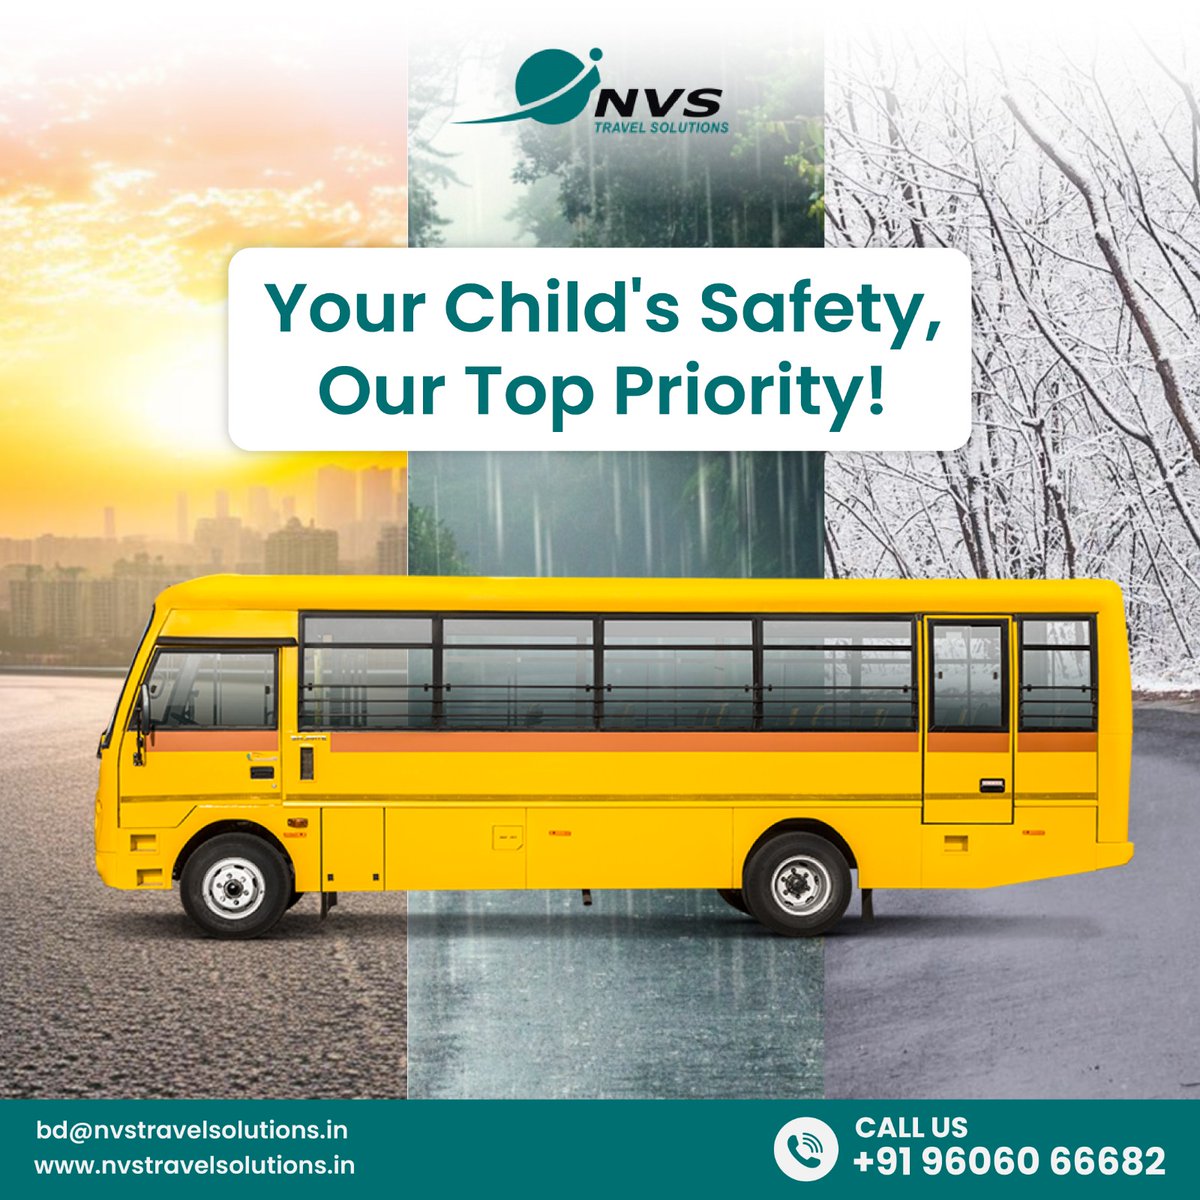 Your child's safety is our priority! With NVS, trust in secure and stress-free school journeys. Peace of mind guaranteed!
Get in touch: +91 9606066682
Visit us - nvstravelsolutions.in

#nvstravel #nvstravelsolutions #transportationservices #schooltransportation